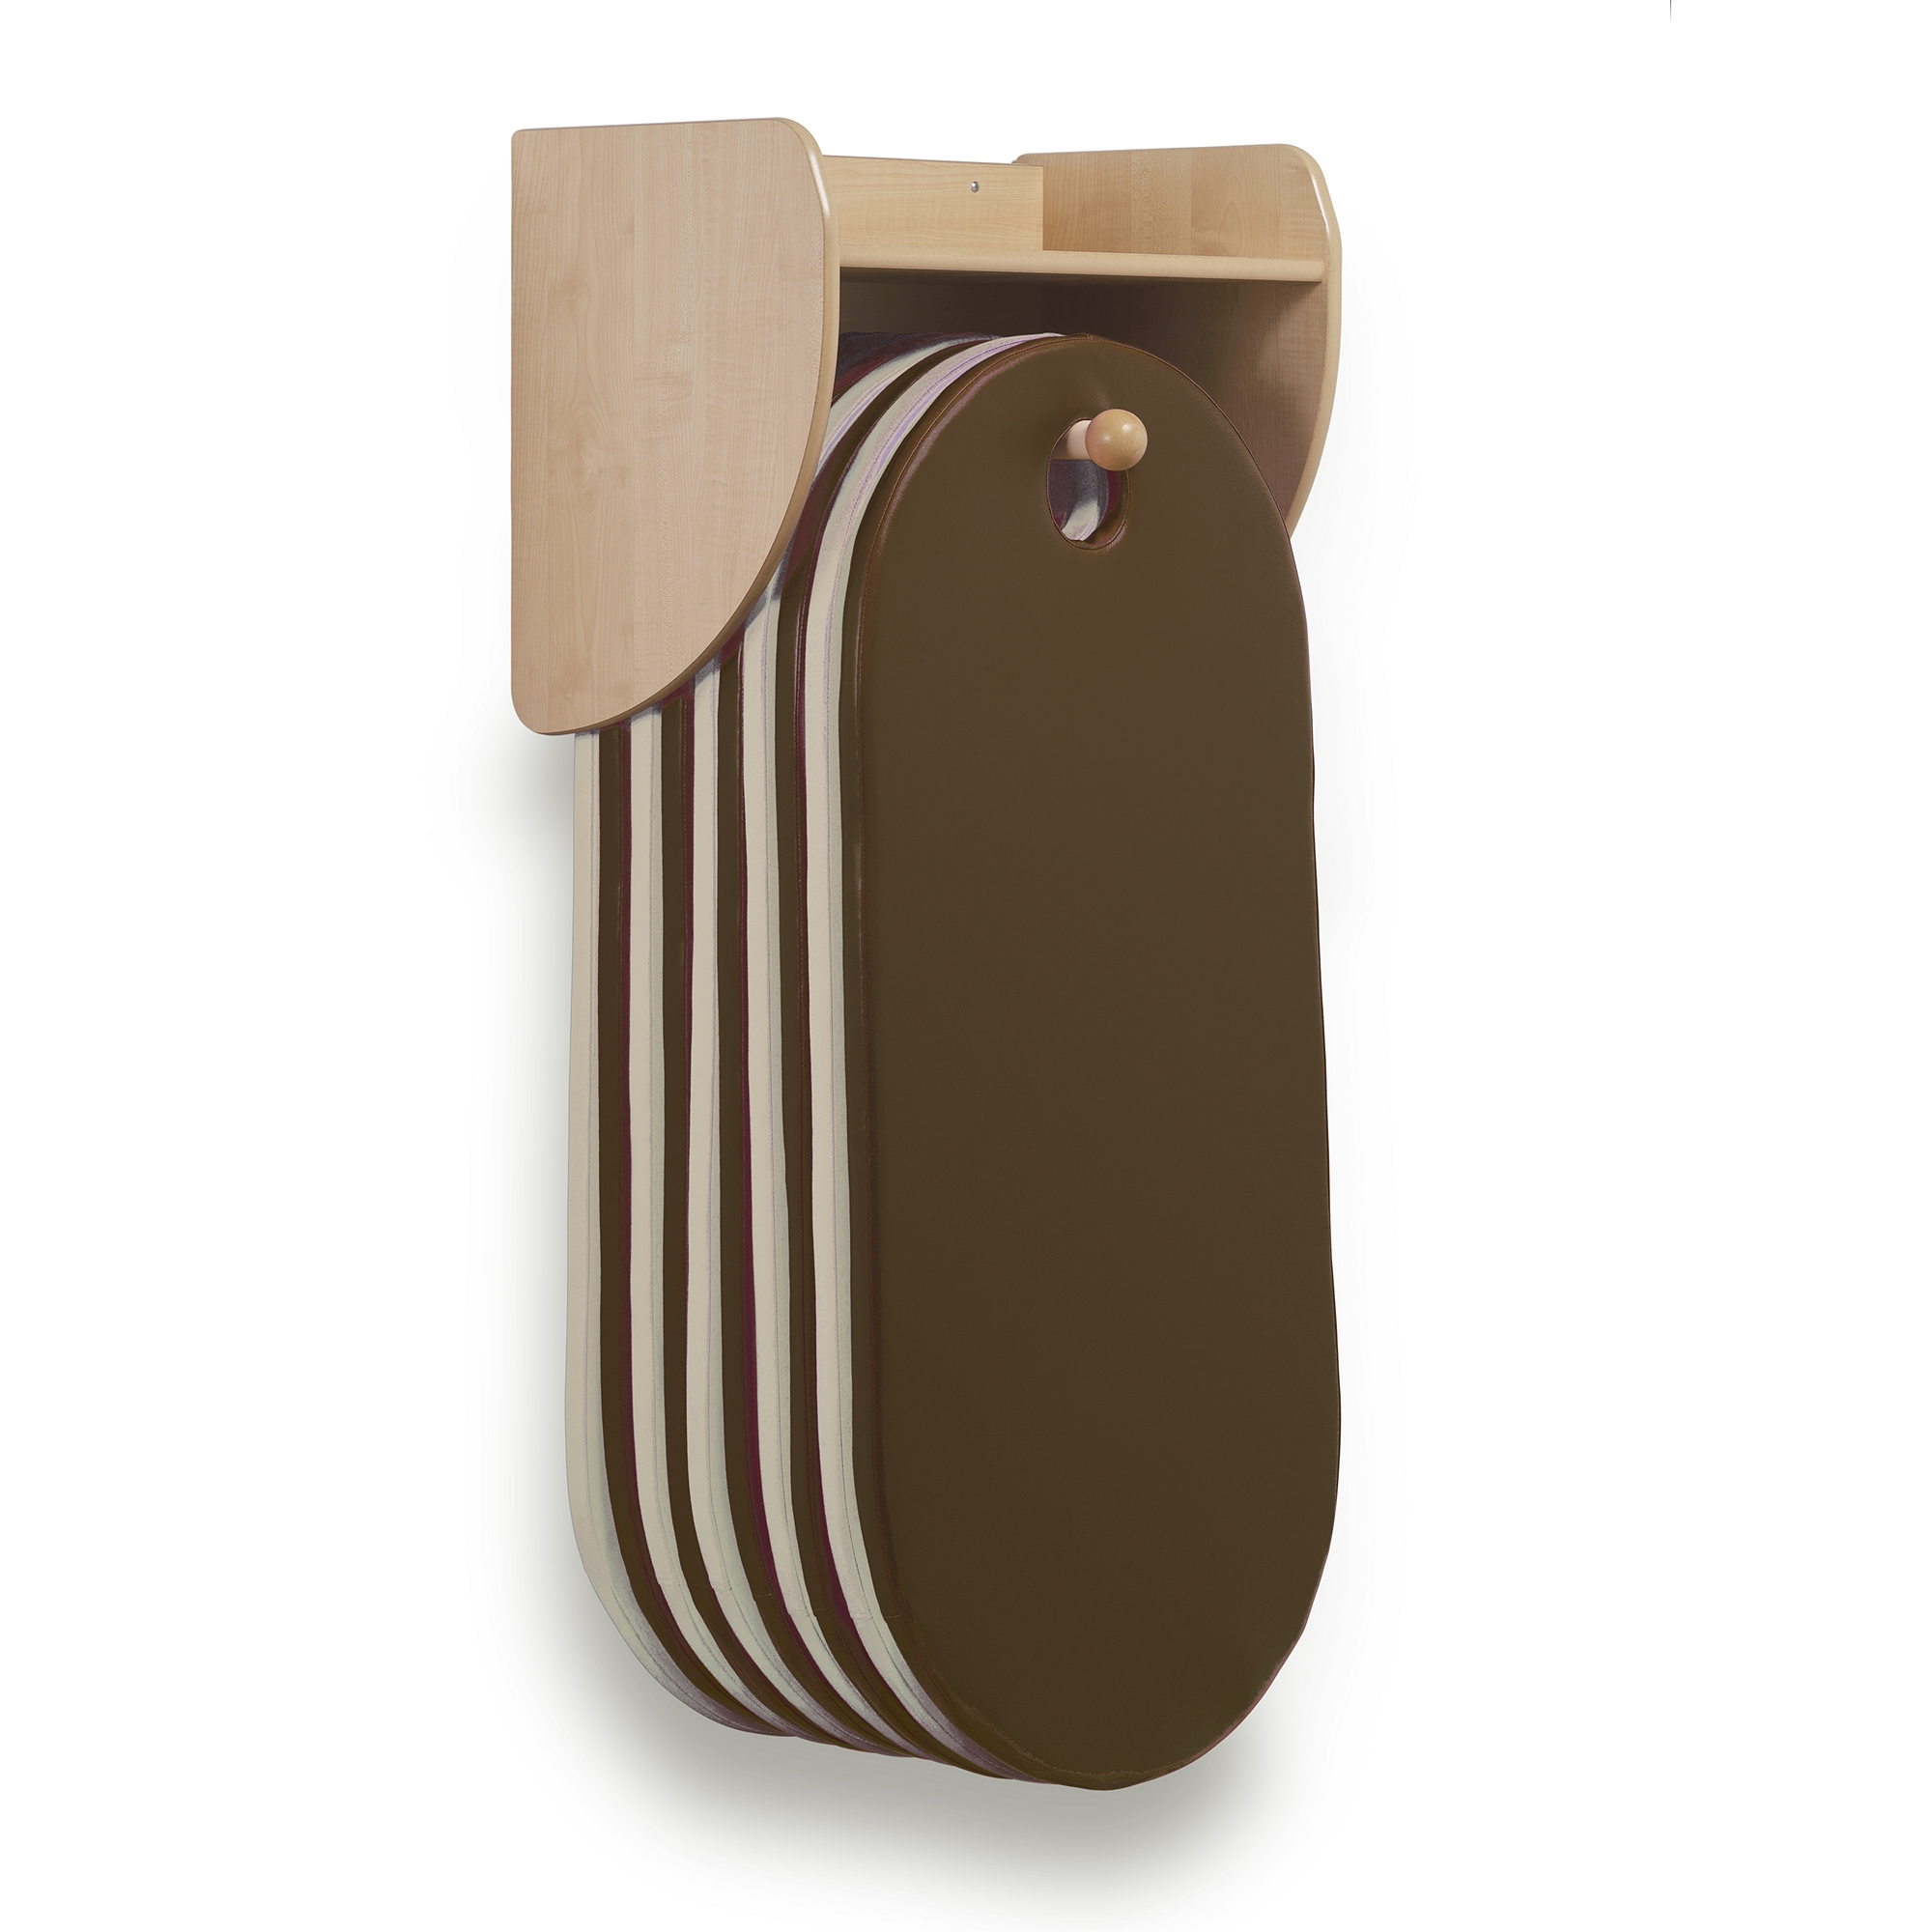 Millhouse Slumberstore Wall Mounted - Brown and Cream